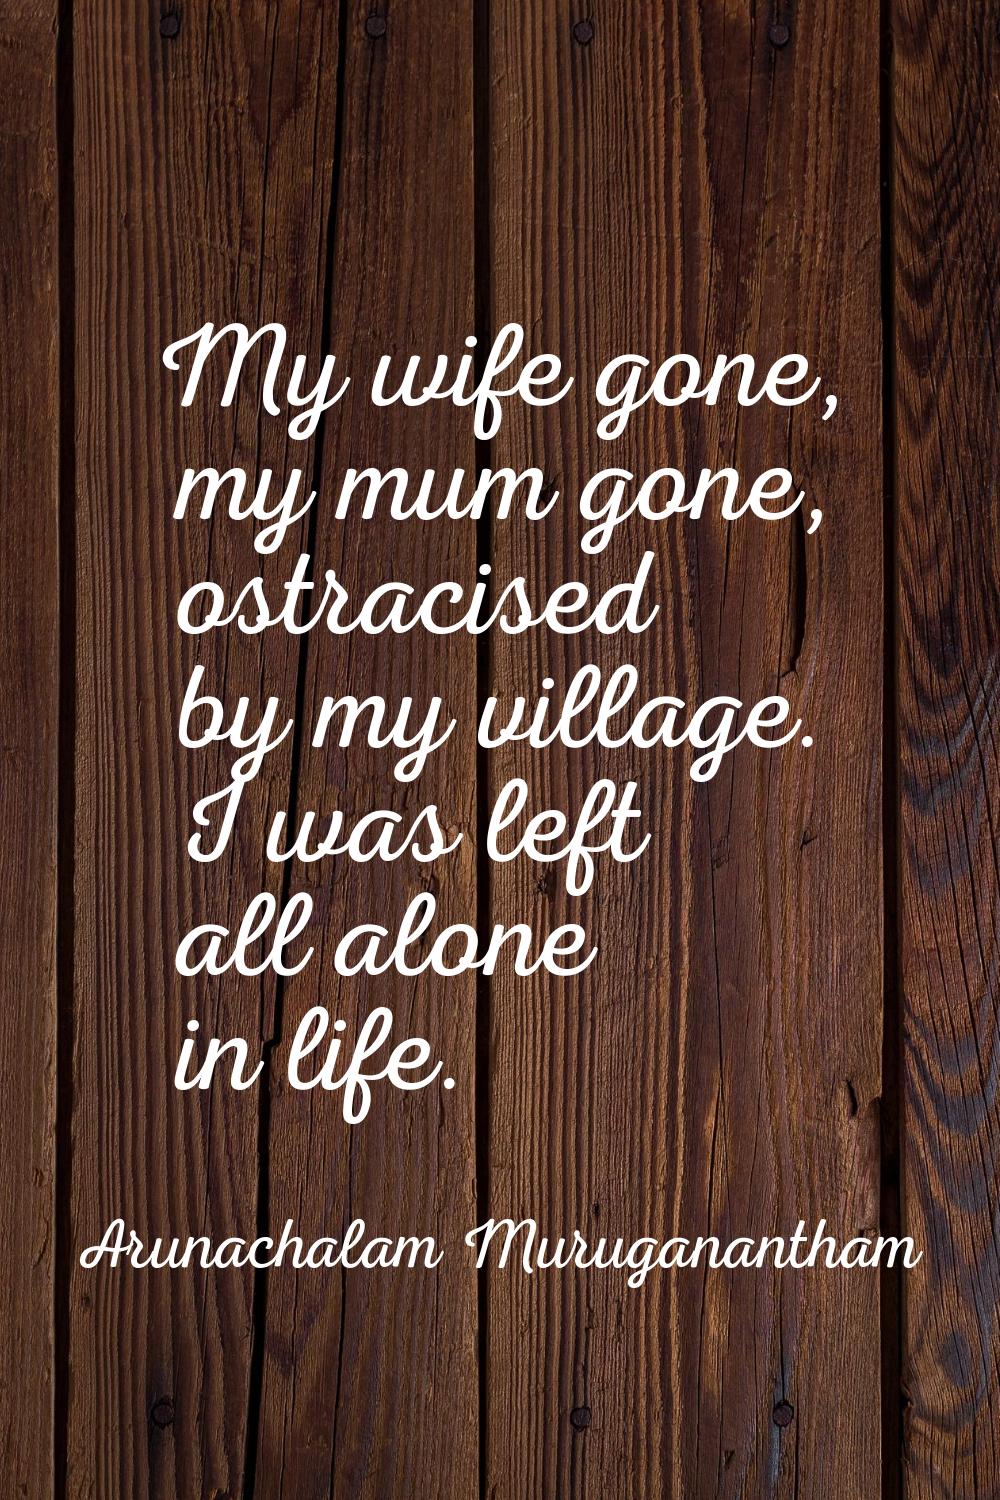 My wife gone, my mum gone, ostracised by my village. I was left all alone in life.